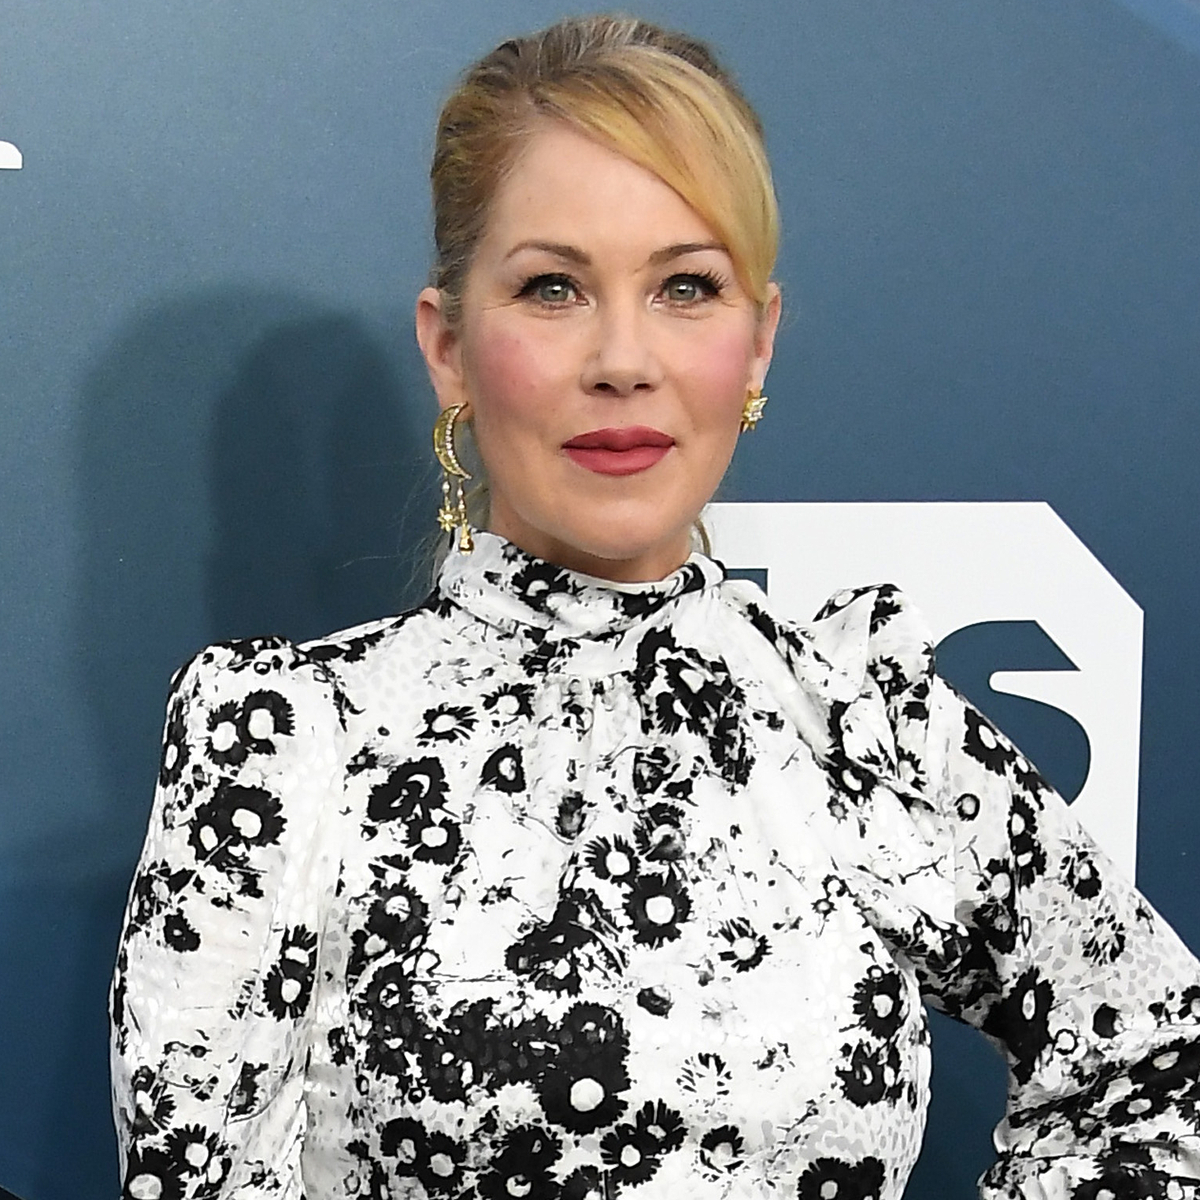 Christina Applegate Suffers “Horrendous” Sapovirus Symptoms After Unknowingly Ingesting Feces